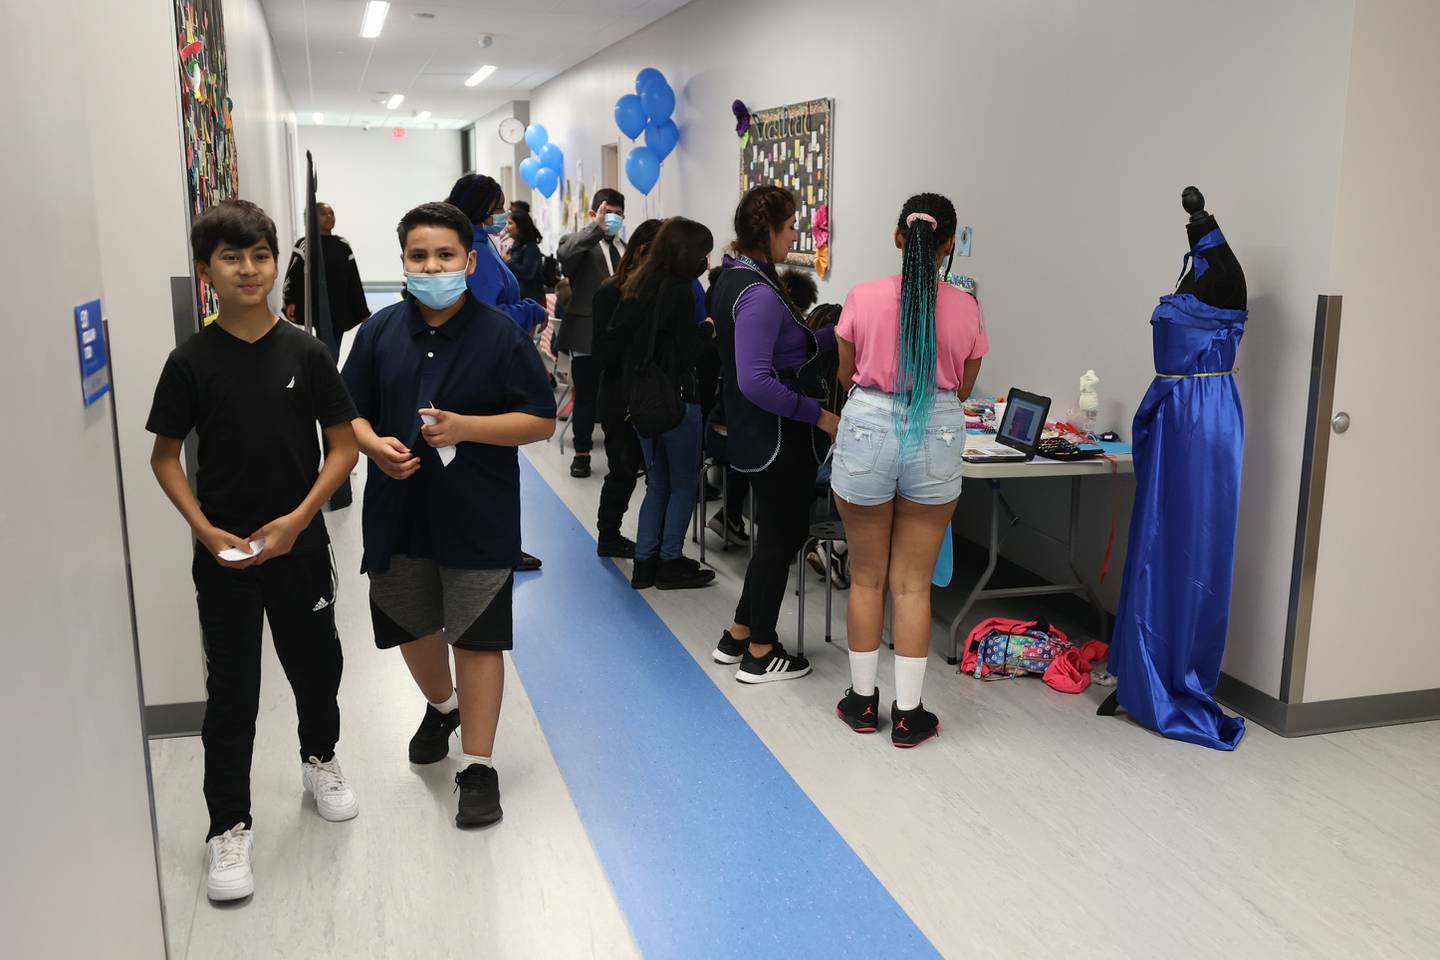 Students browse the various business booths set up at the Laraway 70C 5th Grade Business Expo. Friday, May 13, 2022, in Joliet.